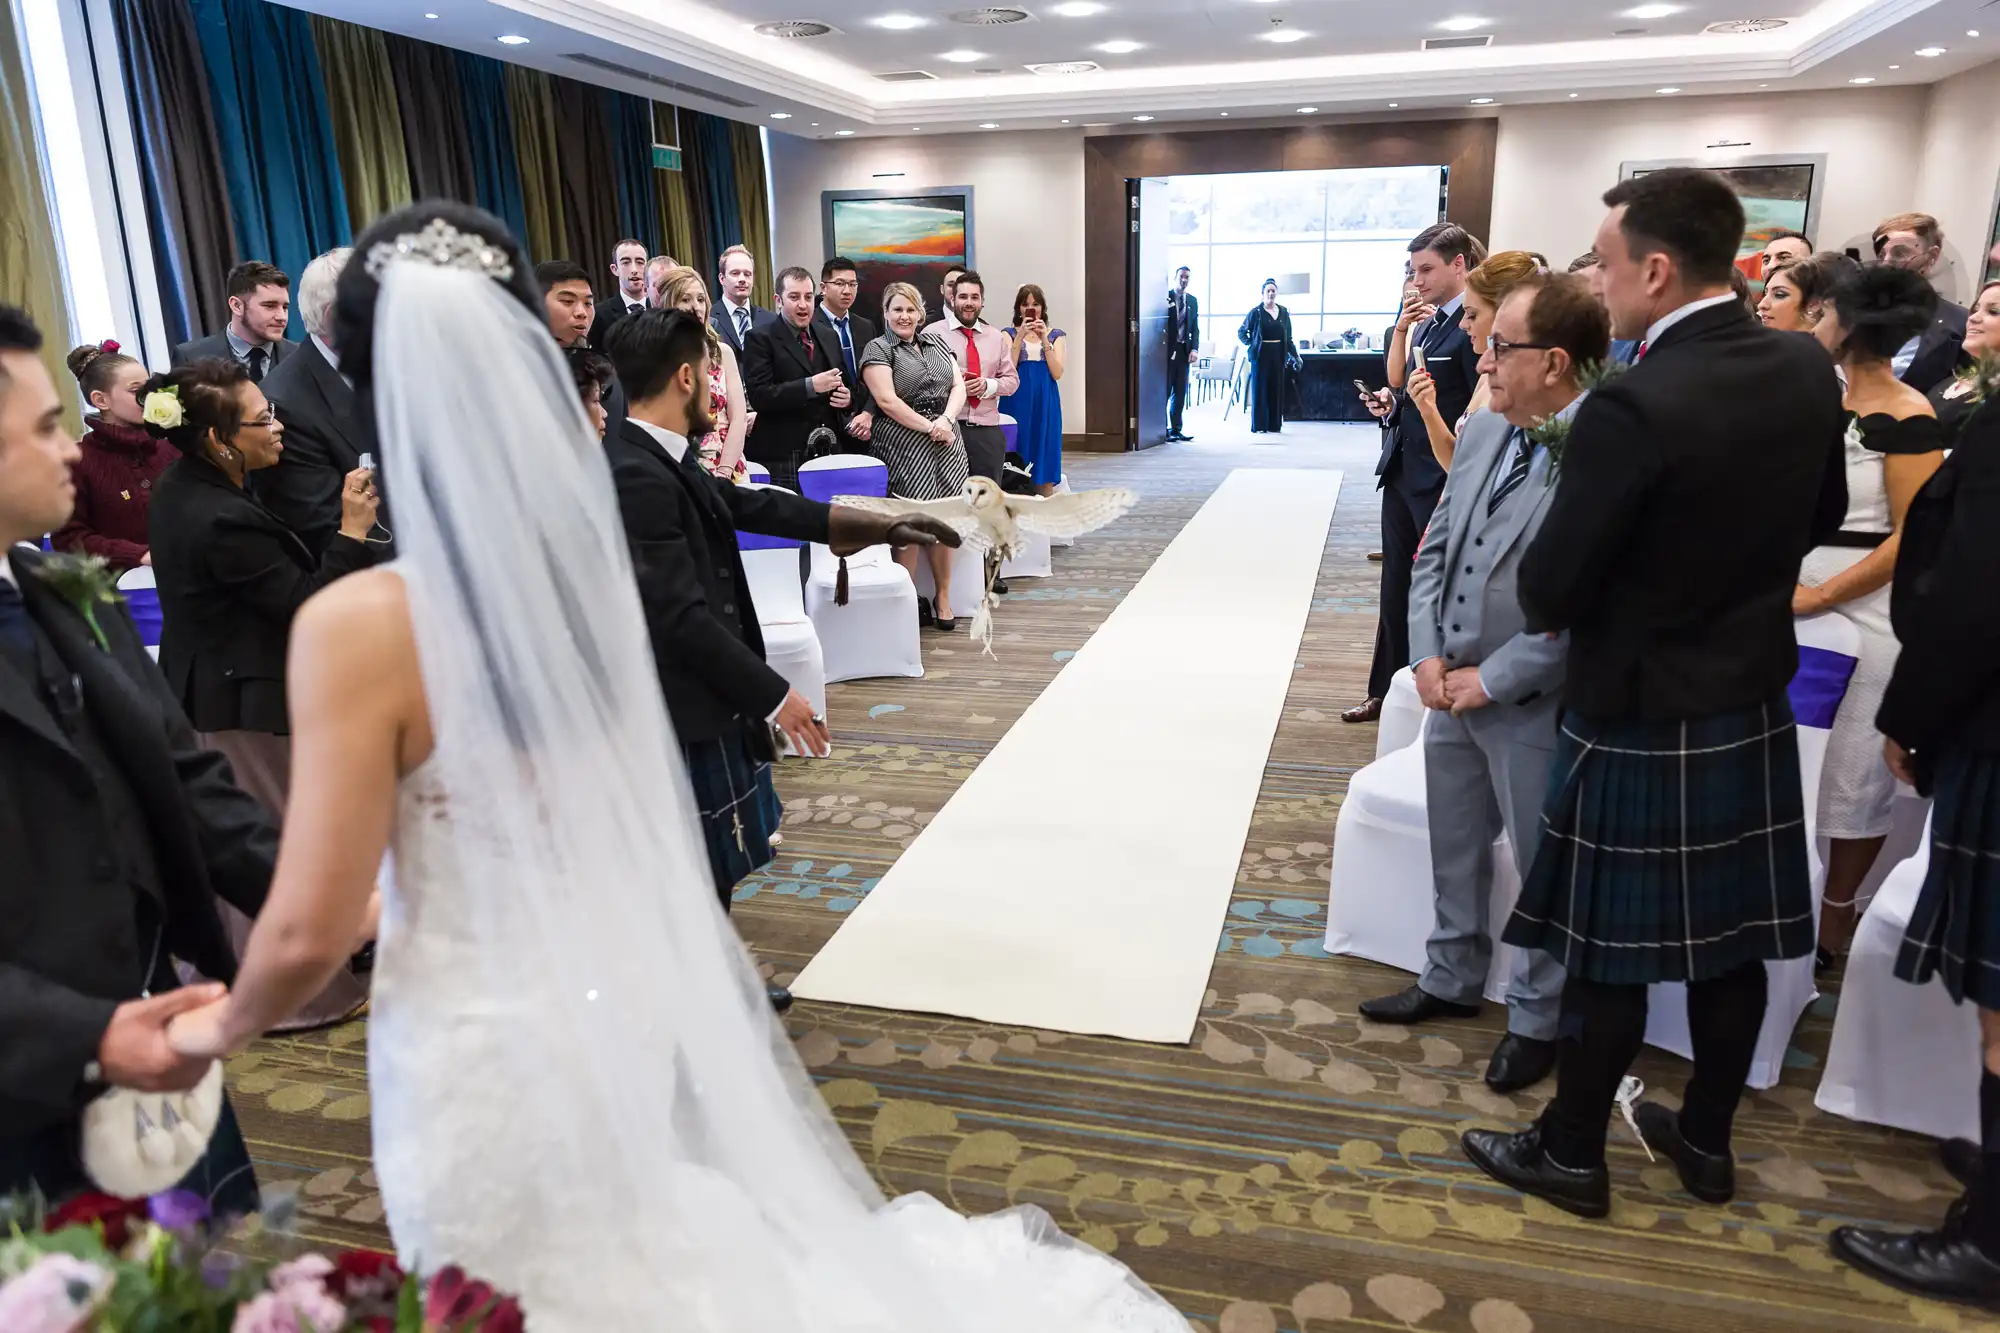 A bride and groom stand at the end of an aisle inside a decorated room, surrounded by guests watching an owl fly towards them.